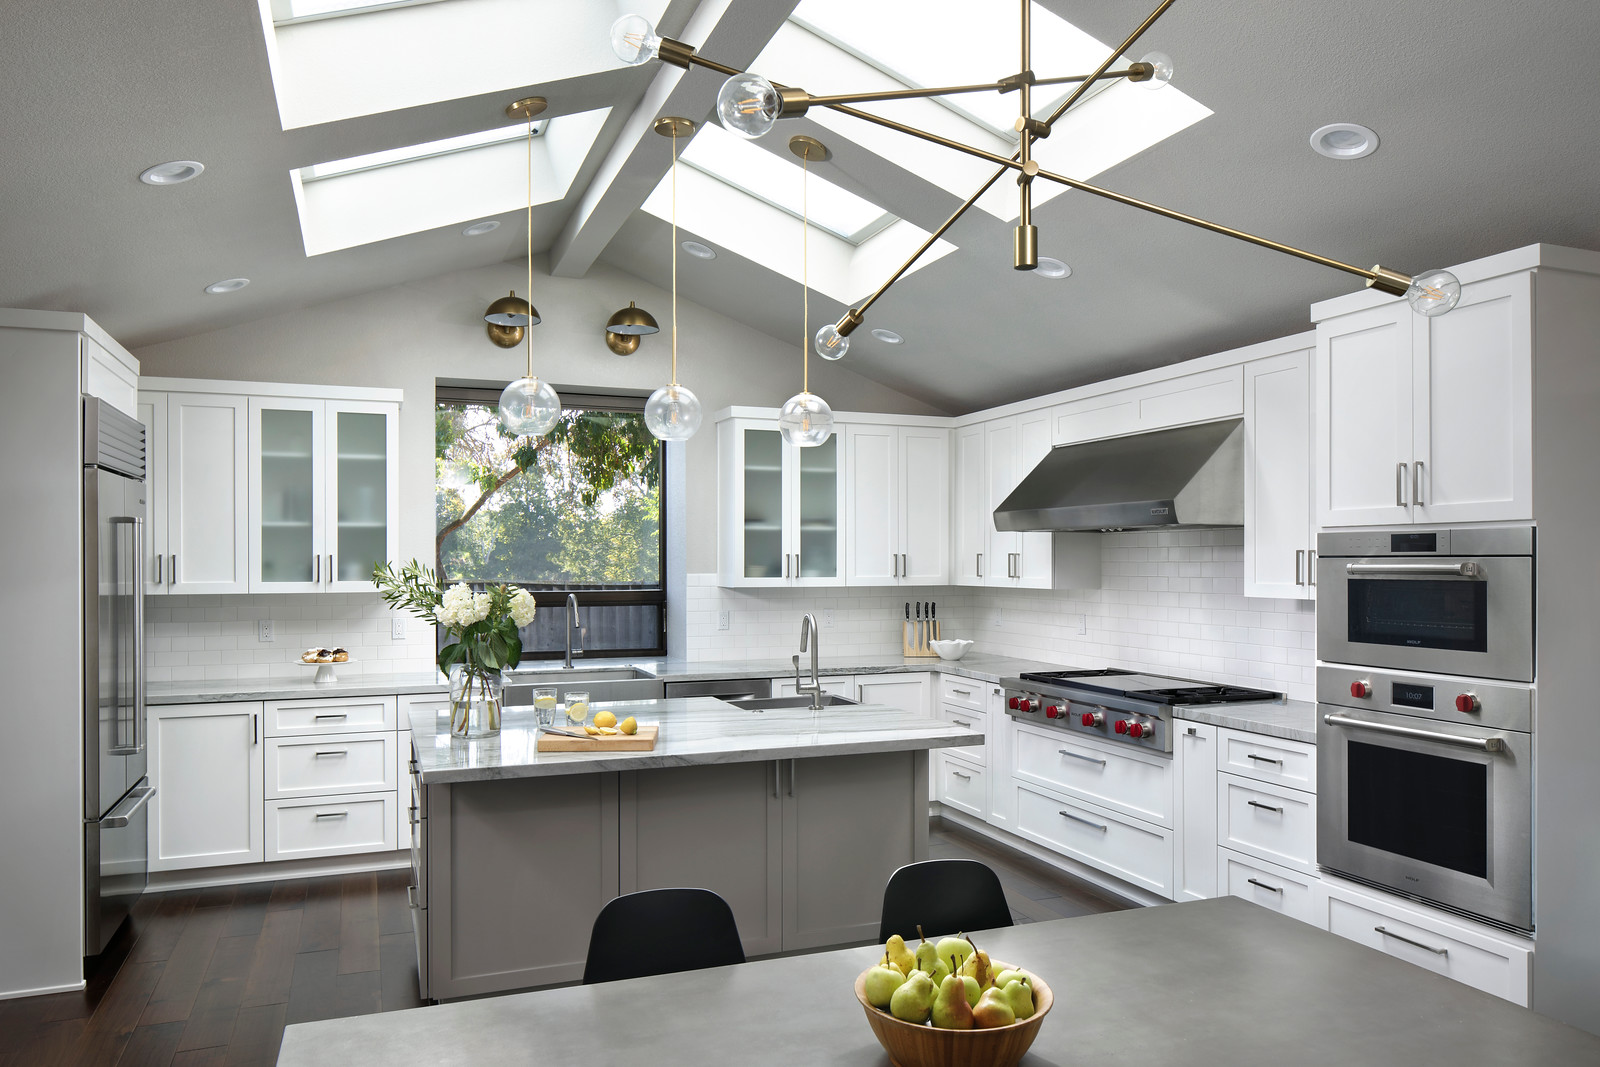 A modern kitchen with grey counter tops, white cabinets, and stainless steel appliances.